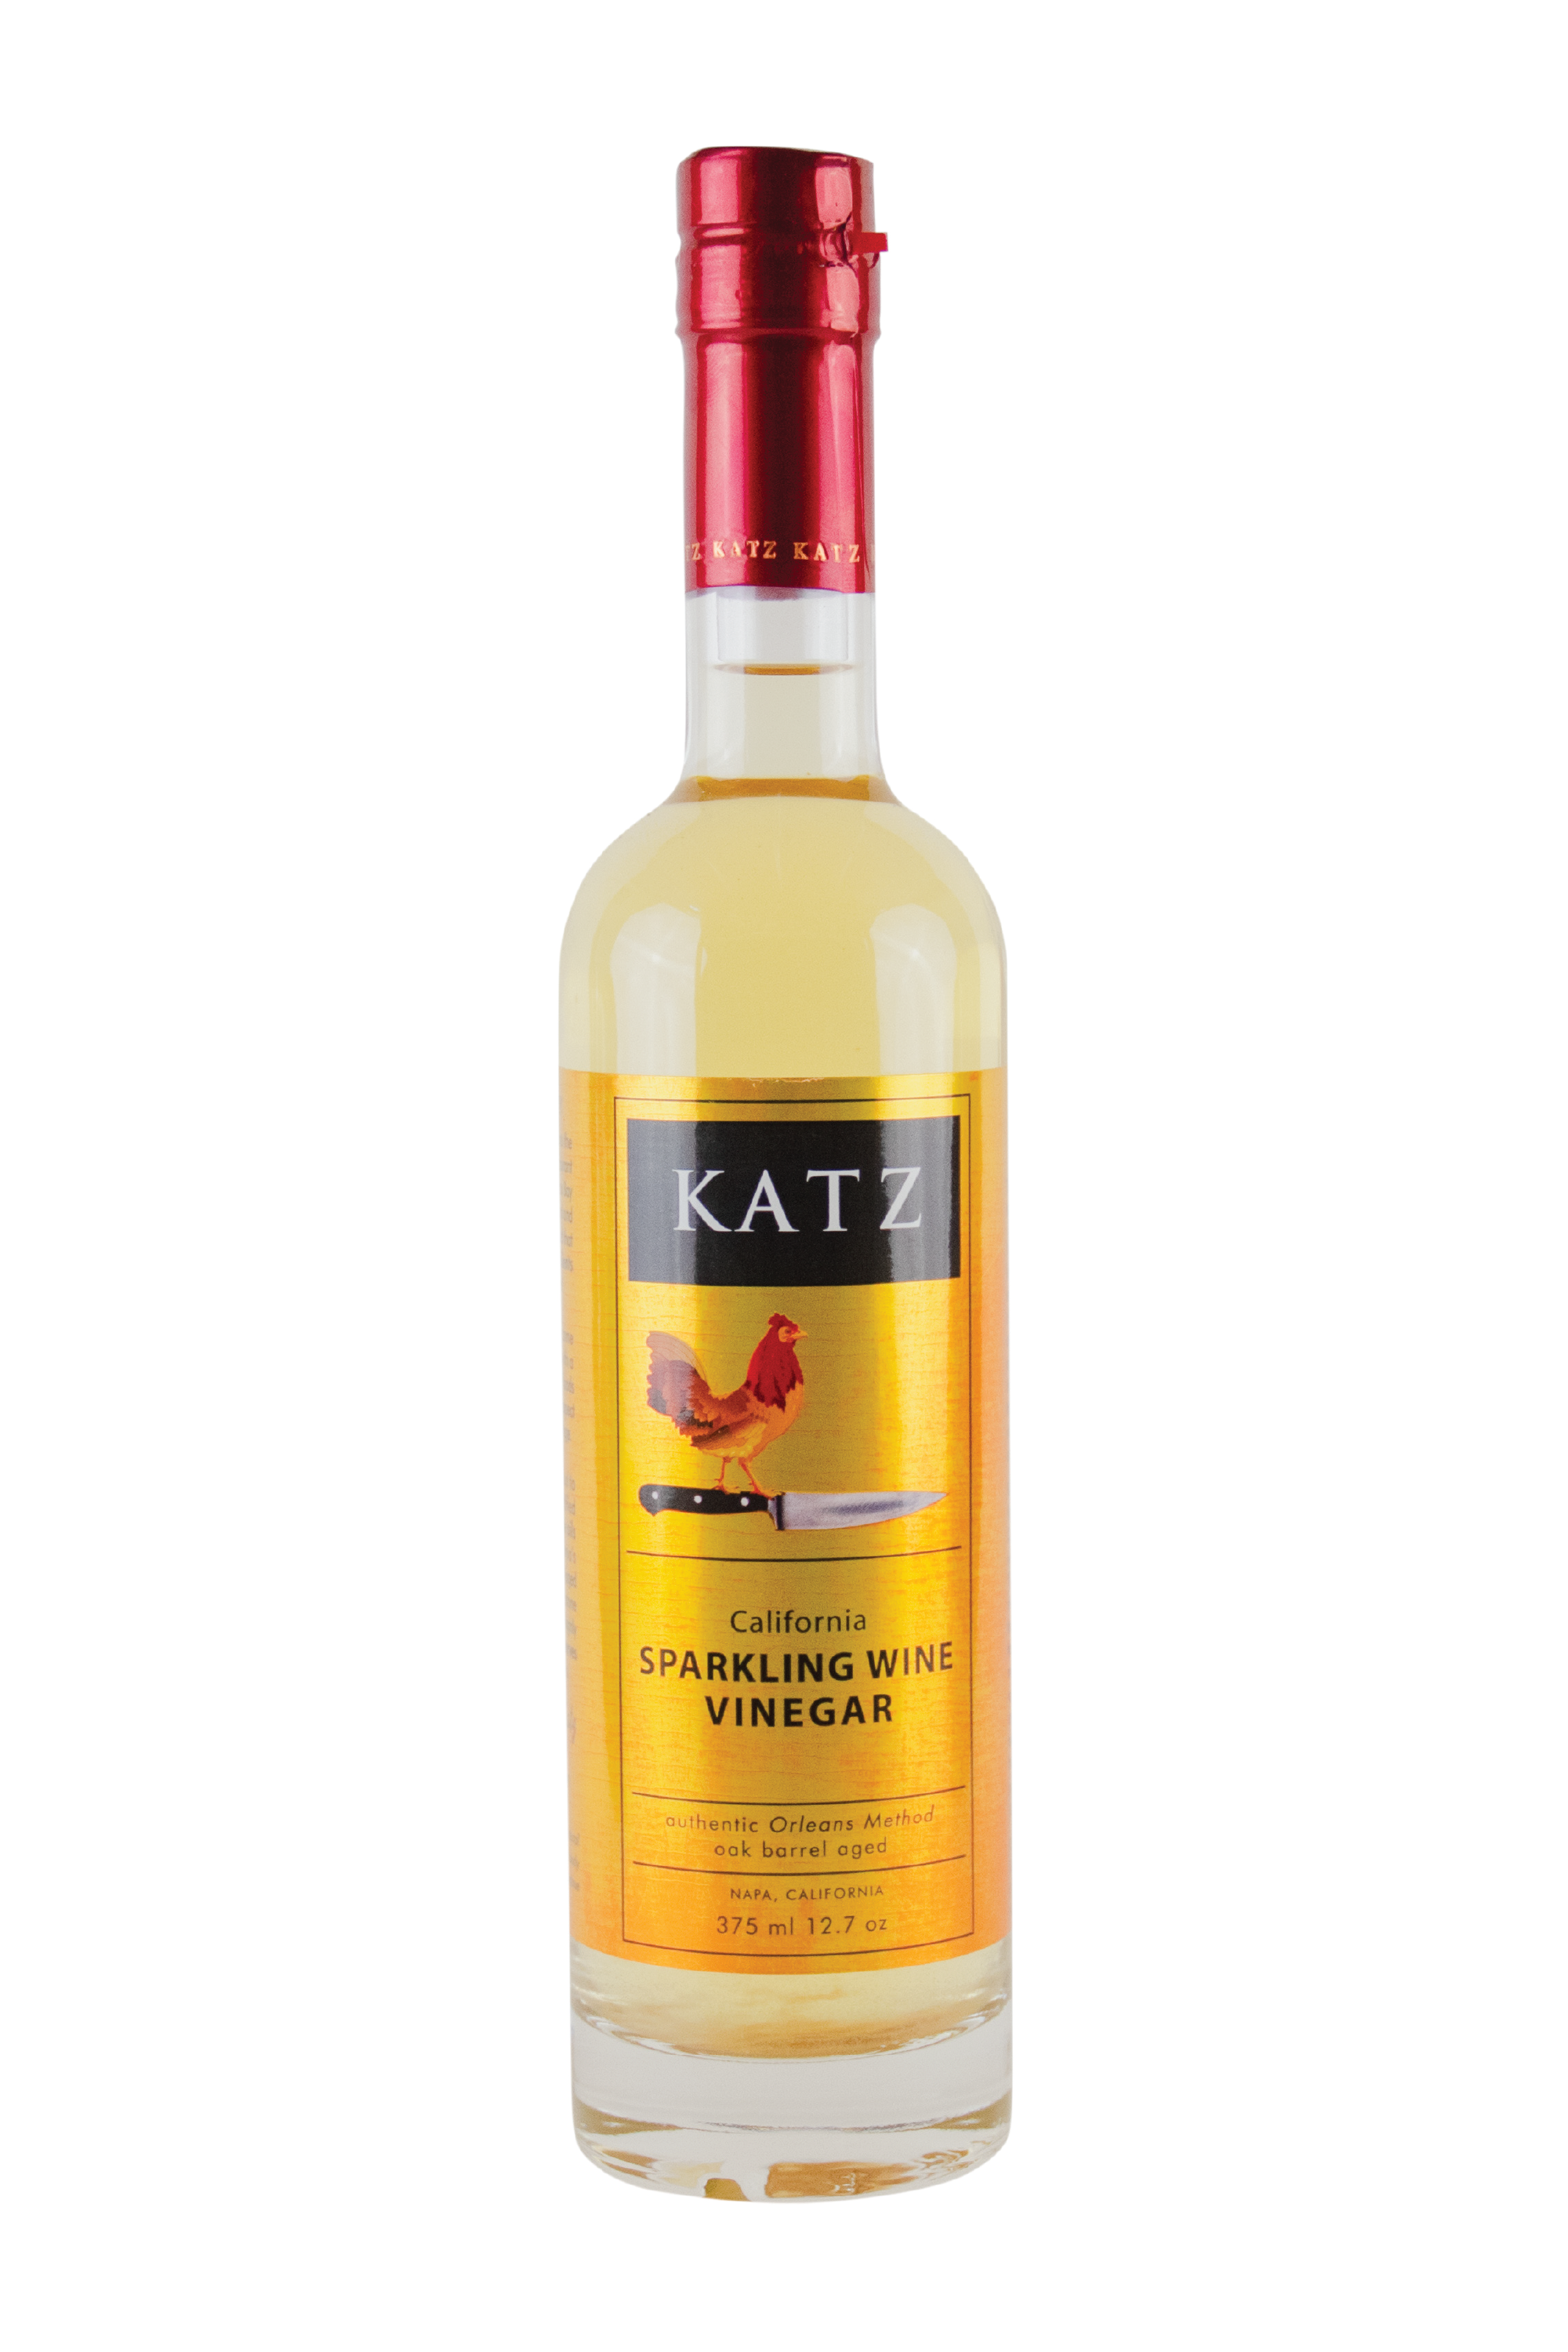 A 375 ml/12.7 oz glass bottle of Katz Sparkling Wine Vinegar on a white background. Label is gold and black with the image of a rooster standing on the hilt of a chef's knife and the words, "Authentic Orleans Method, oak barrel aged" and "Napa, California" on the bottle. Vinegar is a pale yellow, visible through the clear glass bottle with red foil shrink wrap on the top with the word "Katz" printed around the circumference.